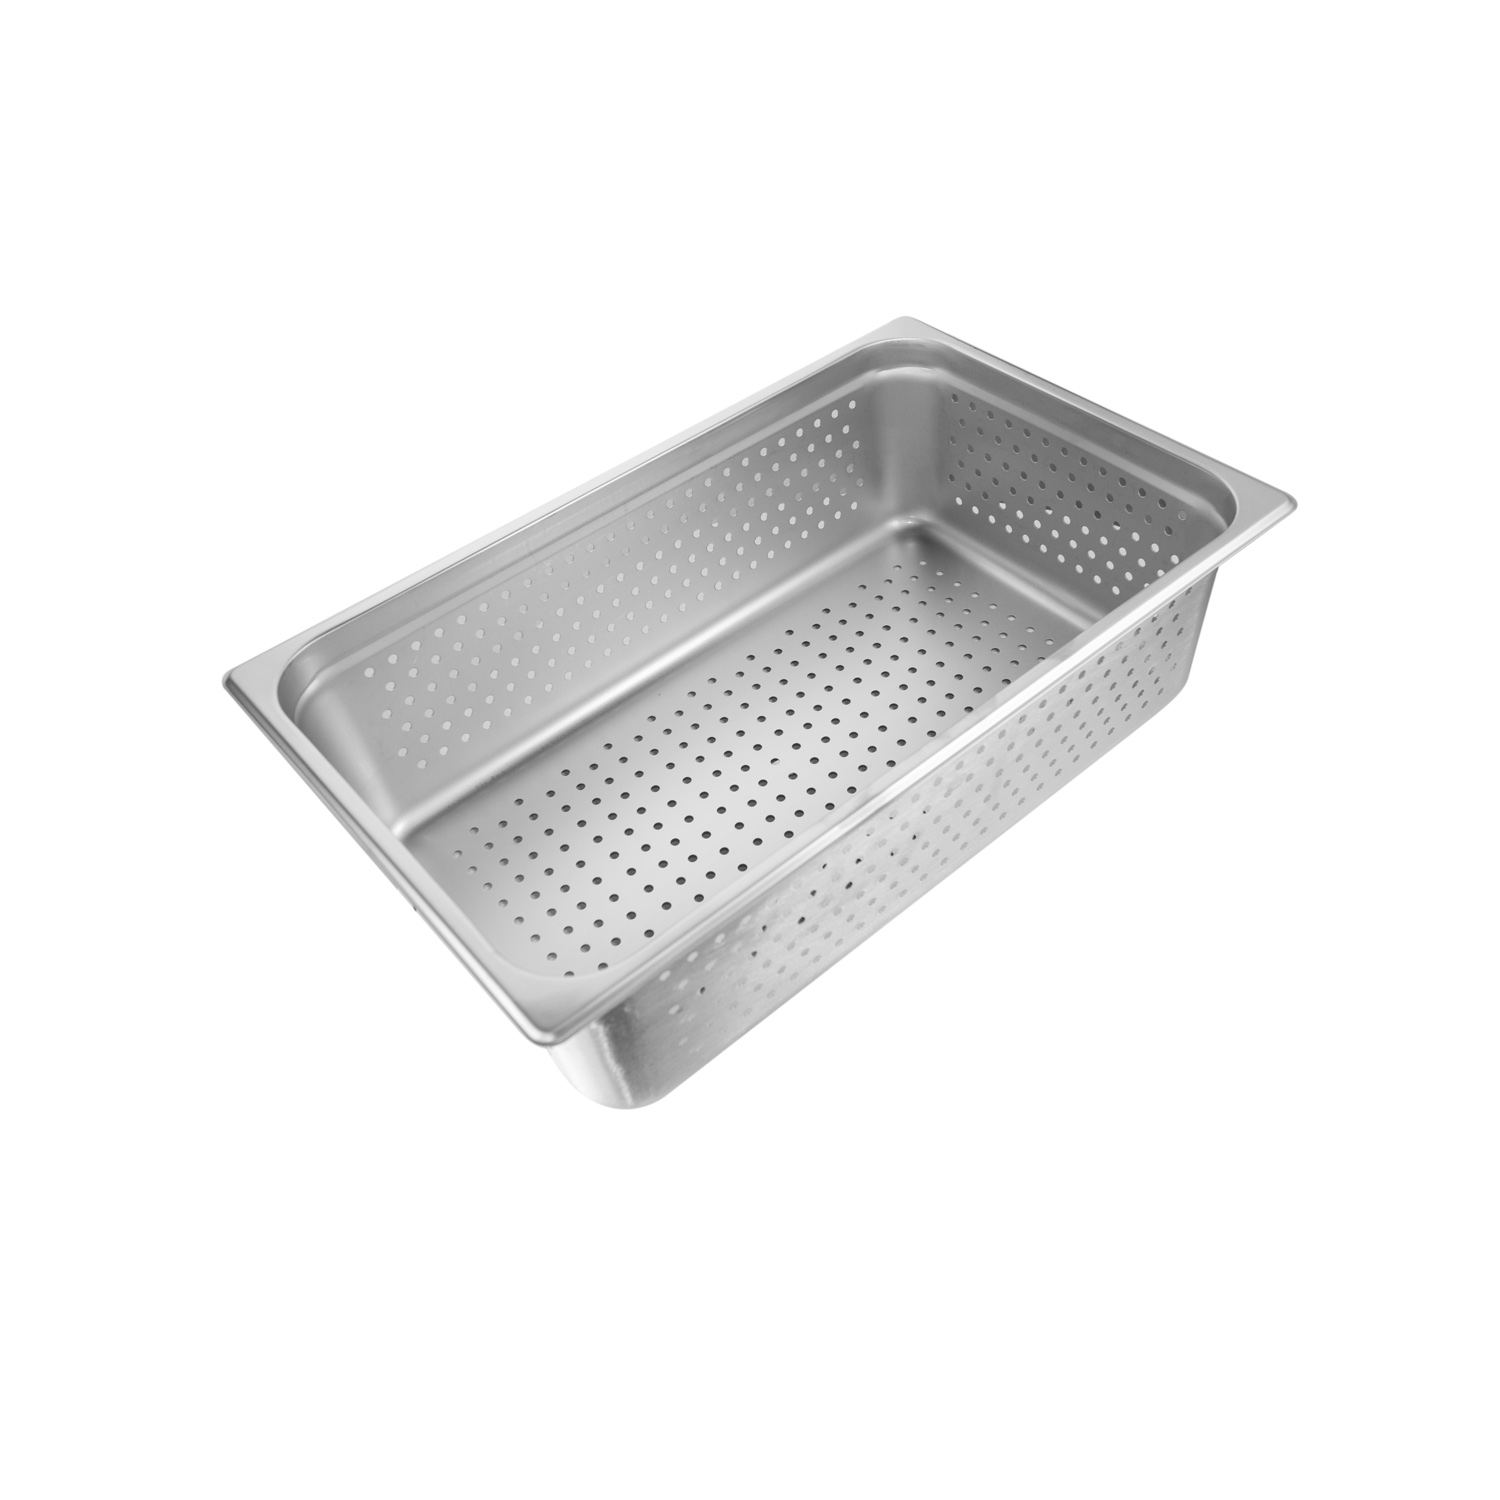 CAC China SSPF-25-6P Full Size 25-Gauge Perforated Stainless Steel Steam Pan 6"